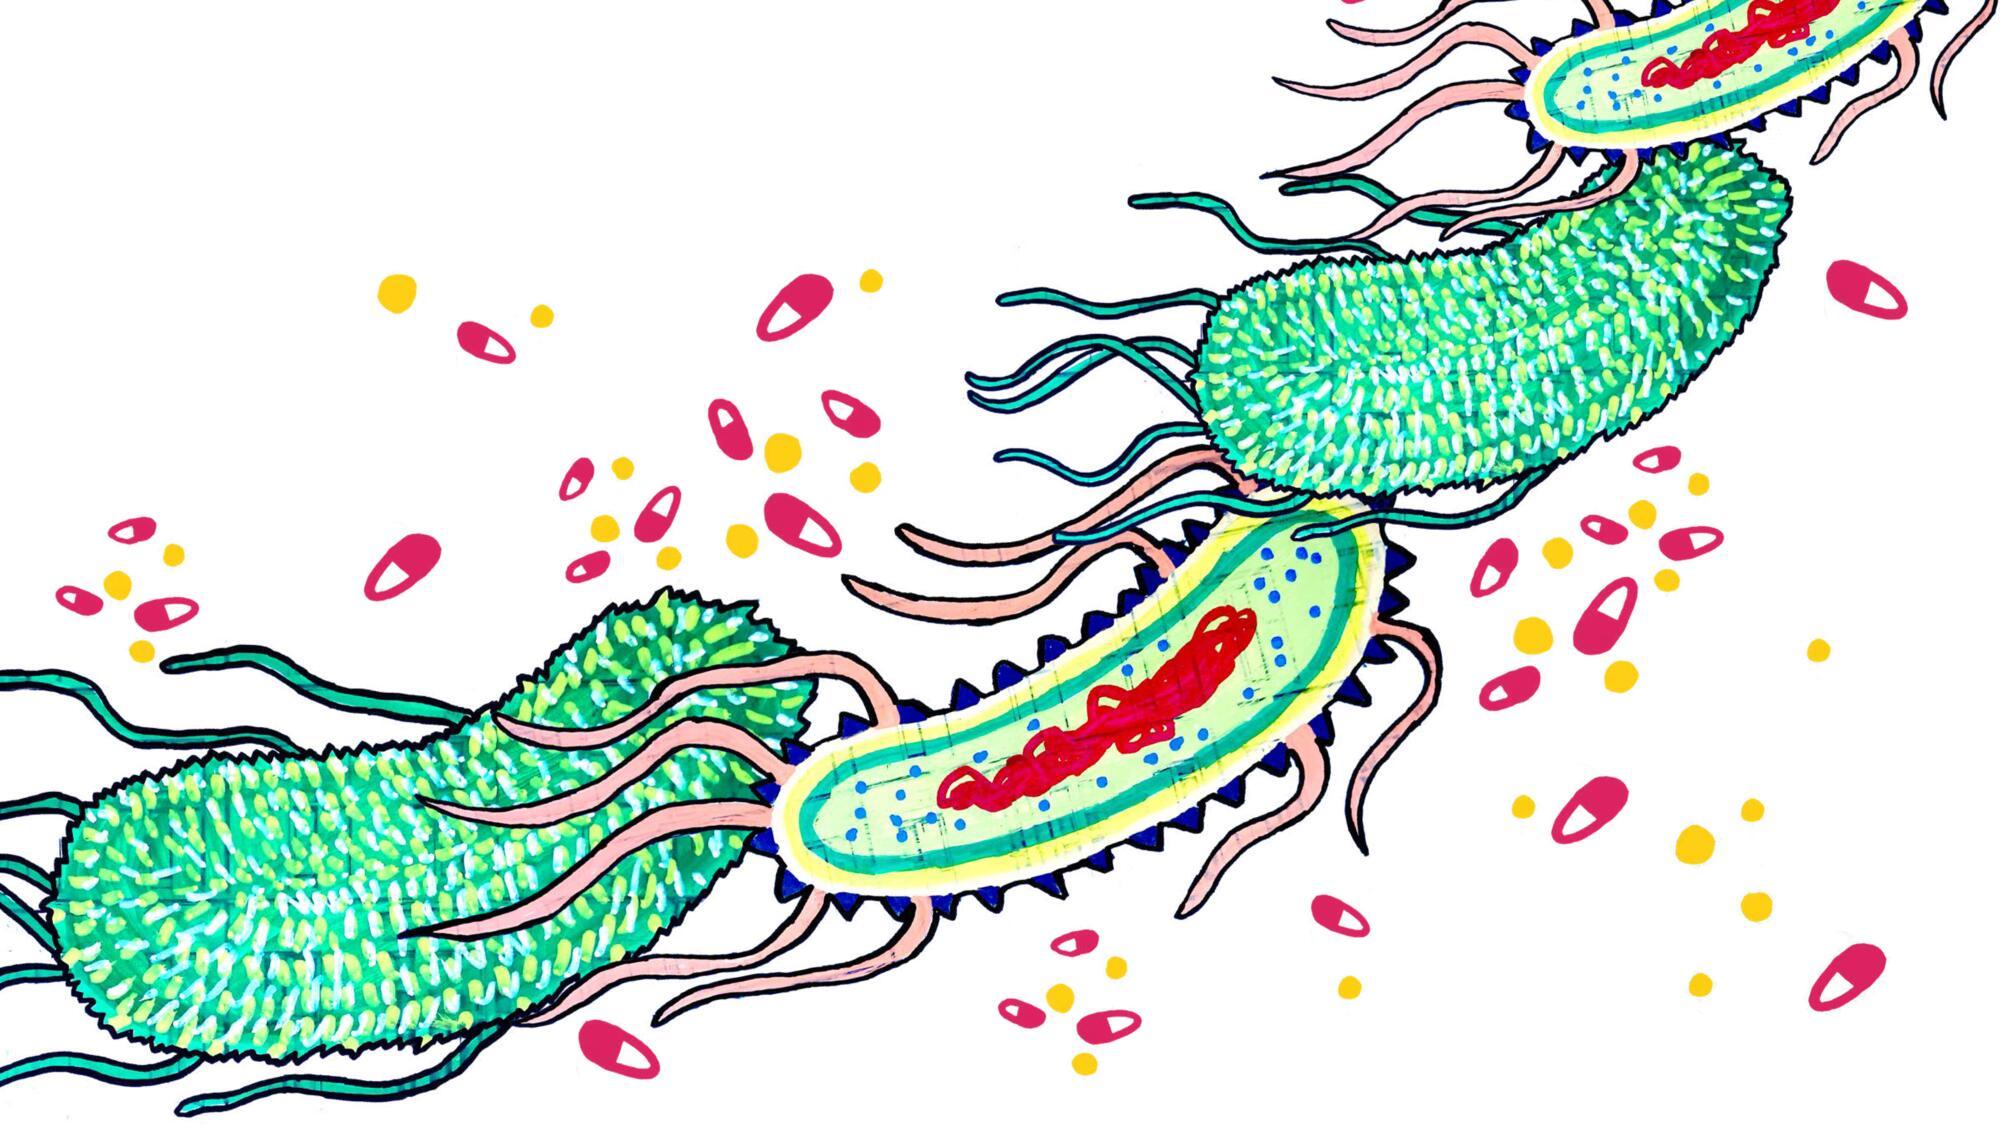 Illustration of microbes